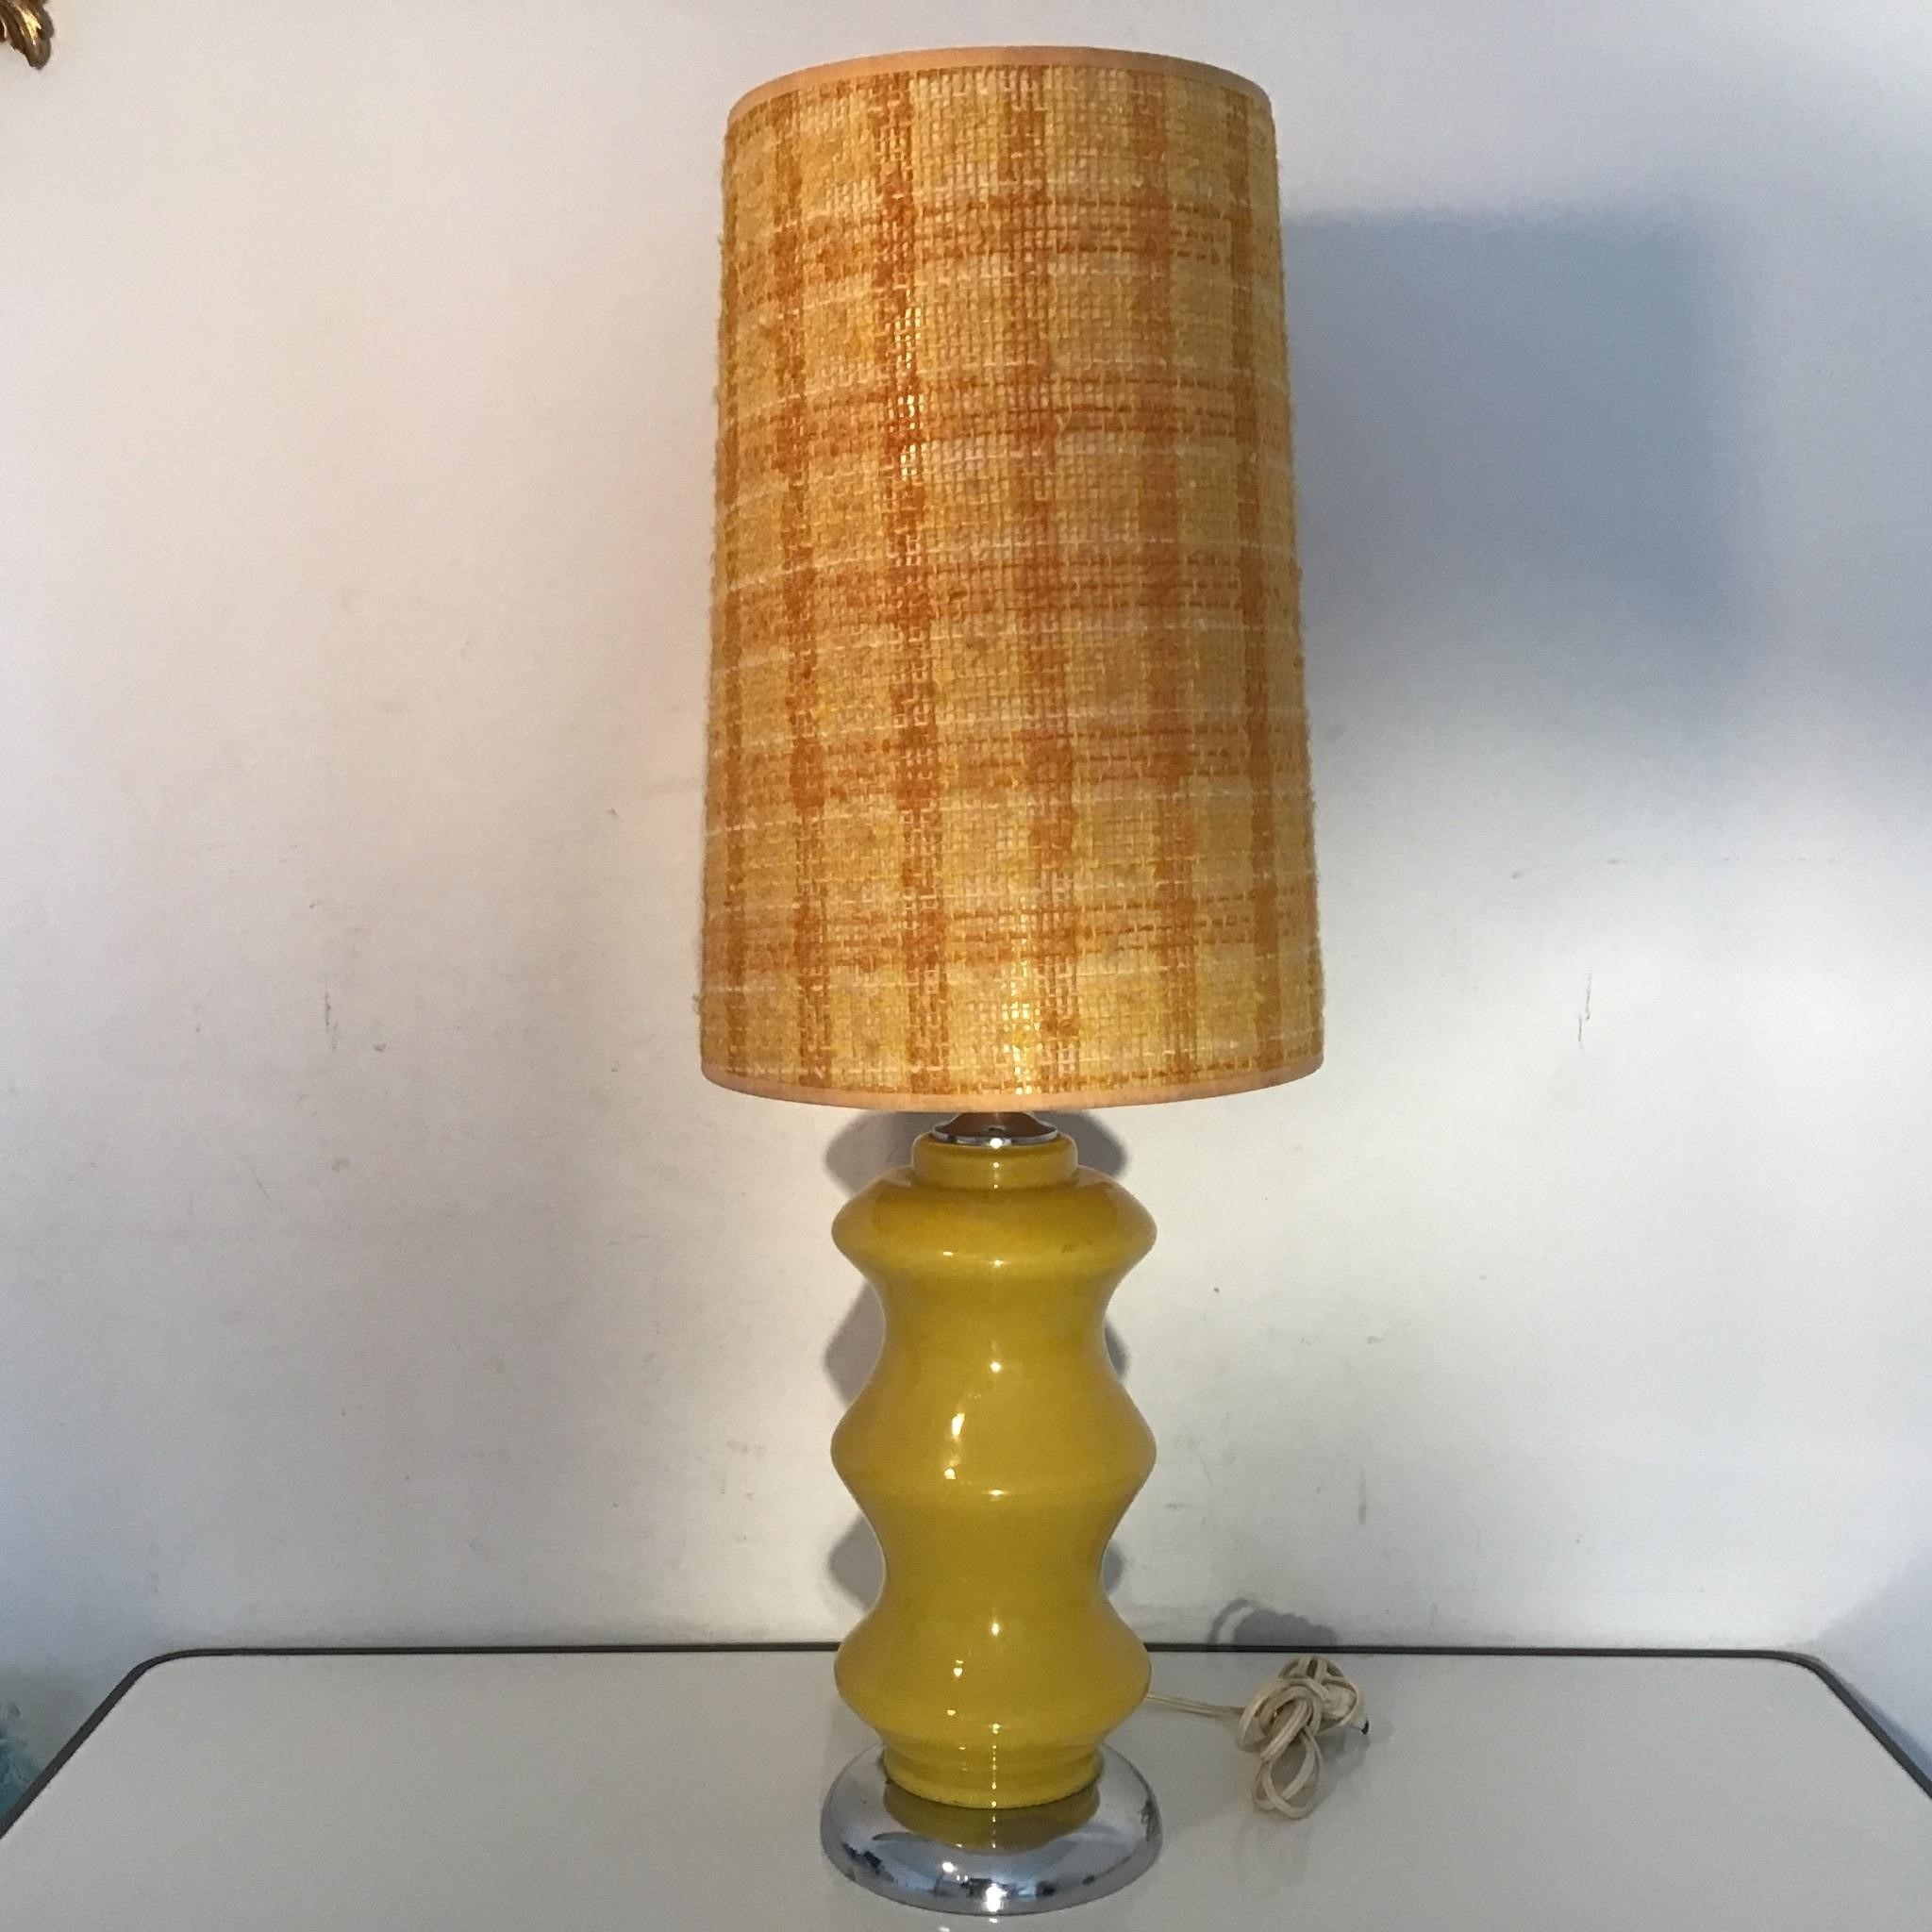 VINTAGE YELLOW GLASS TABLE LAMP